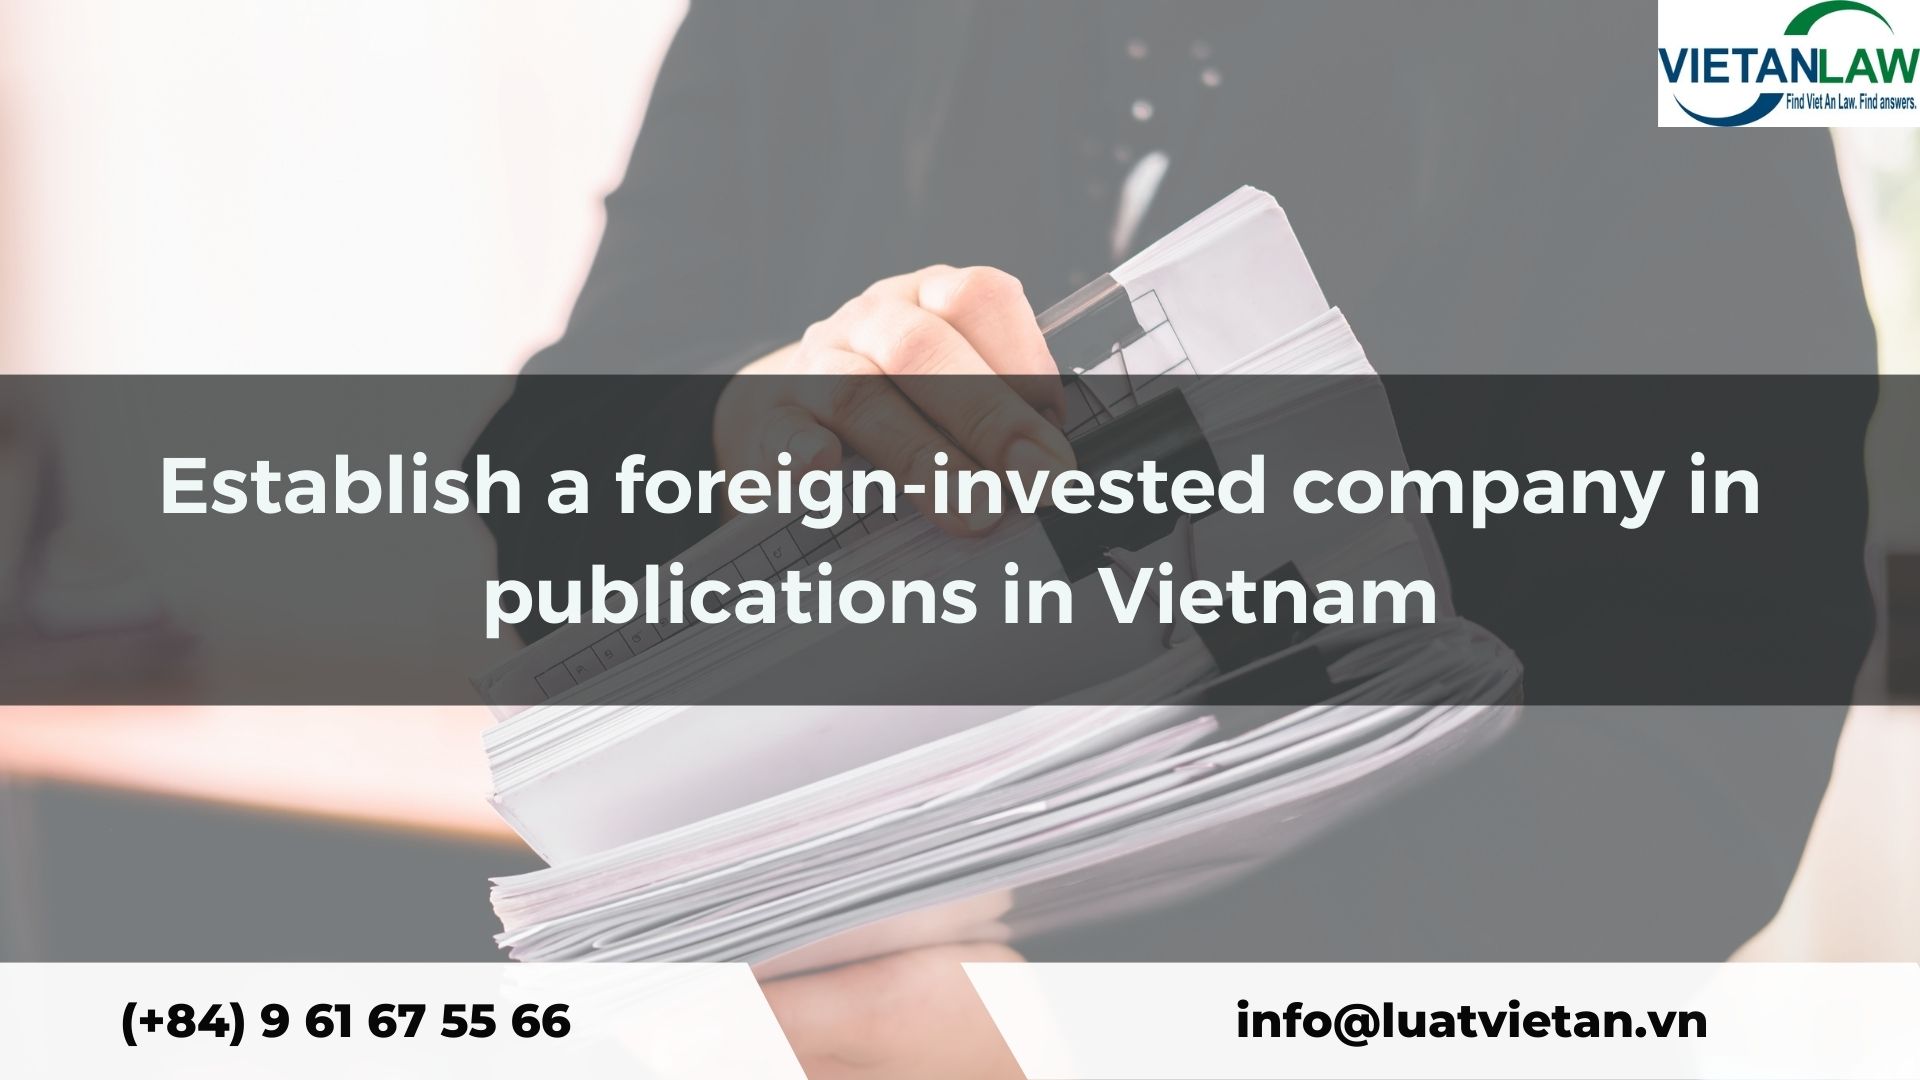 Establish a foreign-invested company in publications in Vietnam